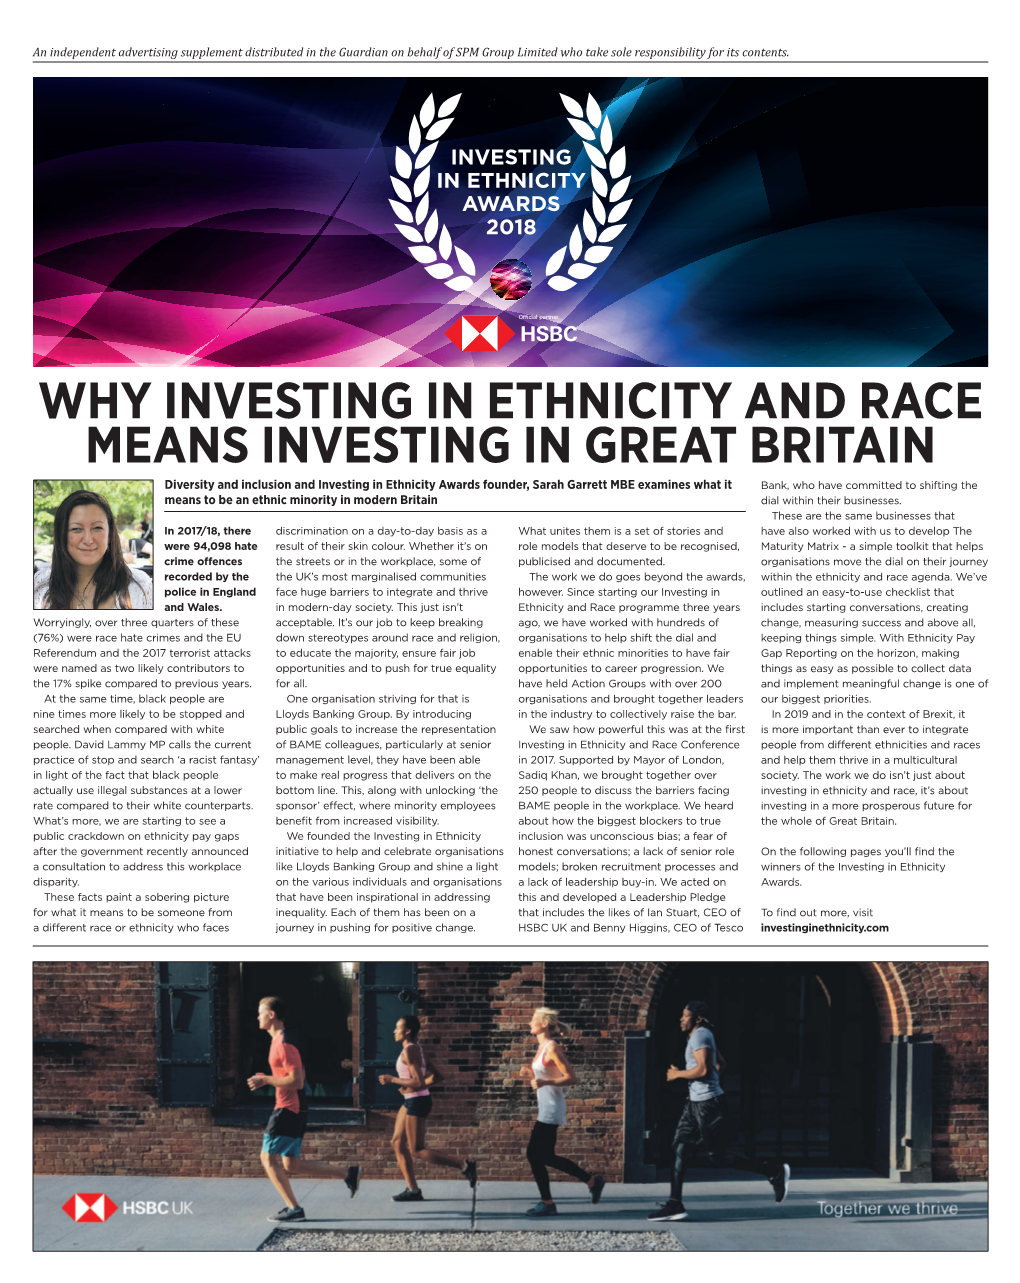 Why Investing in Ethnicity and Race Means Investing in Great Britain